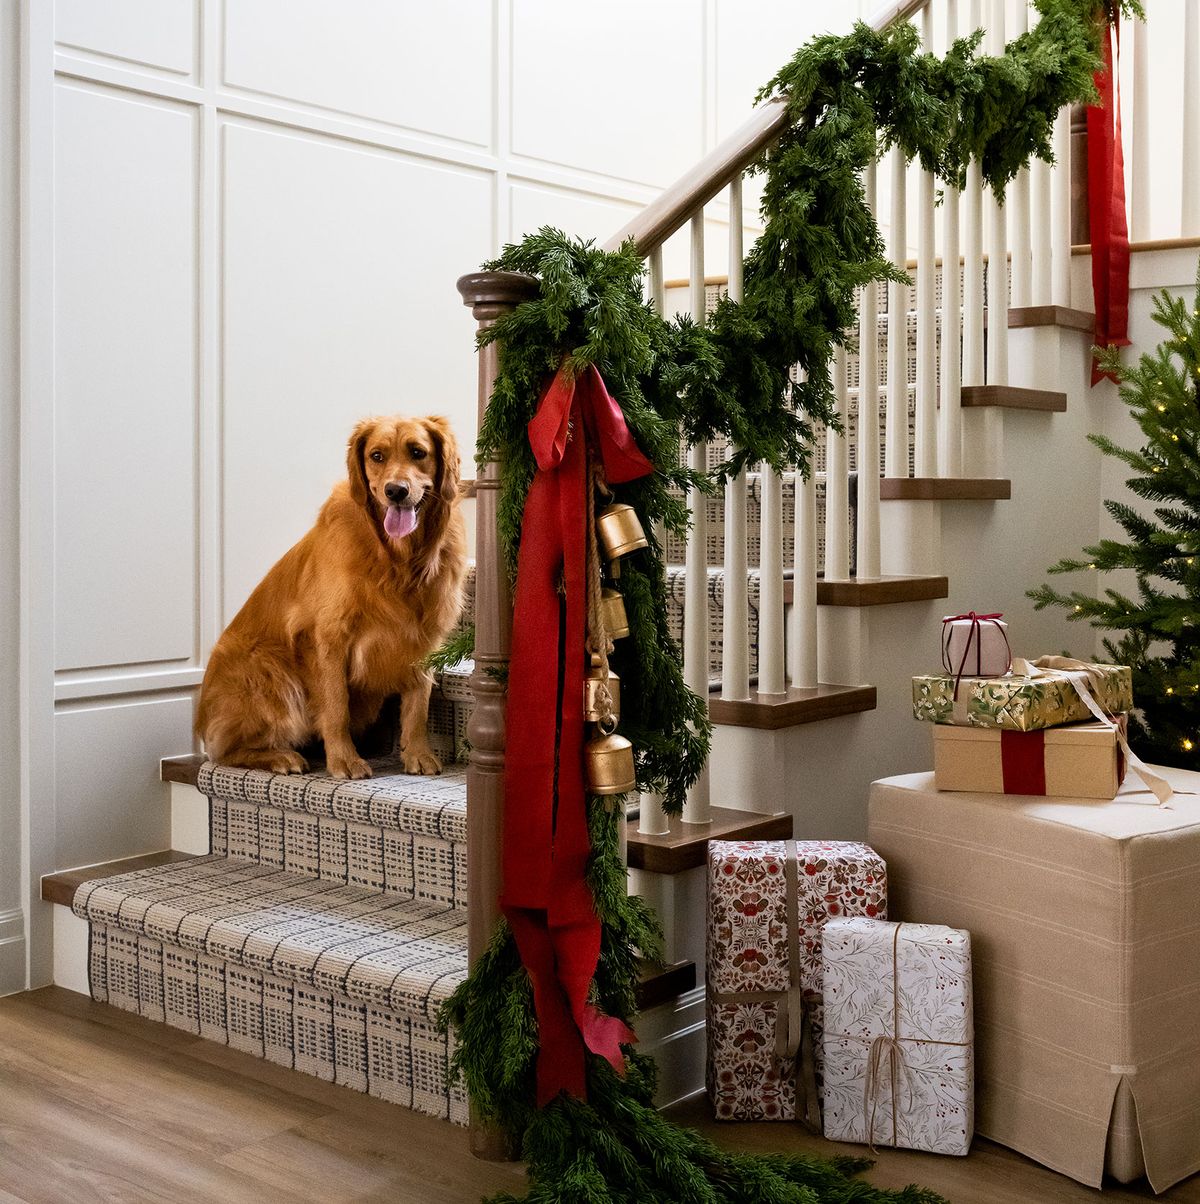 https://hips.hearstapps.com/hmg-prod/images/christmas-stair-decor-studio-mcgee-shea-mcgee-lucy-call-holiday2022-146-652e9f2947b49.jpg?crop=1.00xw:0.669xh;0,0.244xh&resize=1200:*